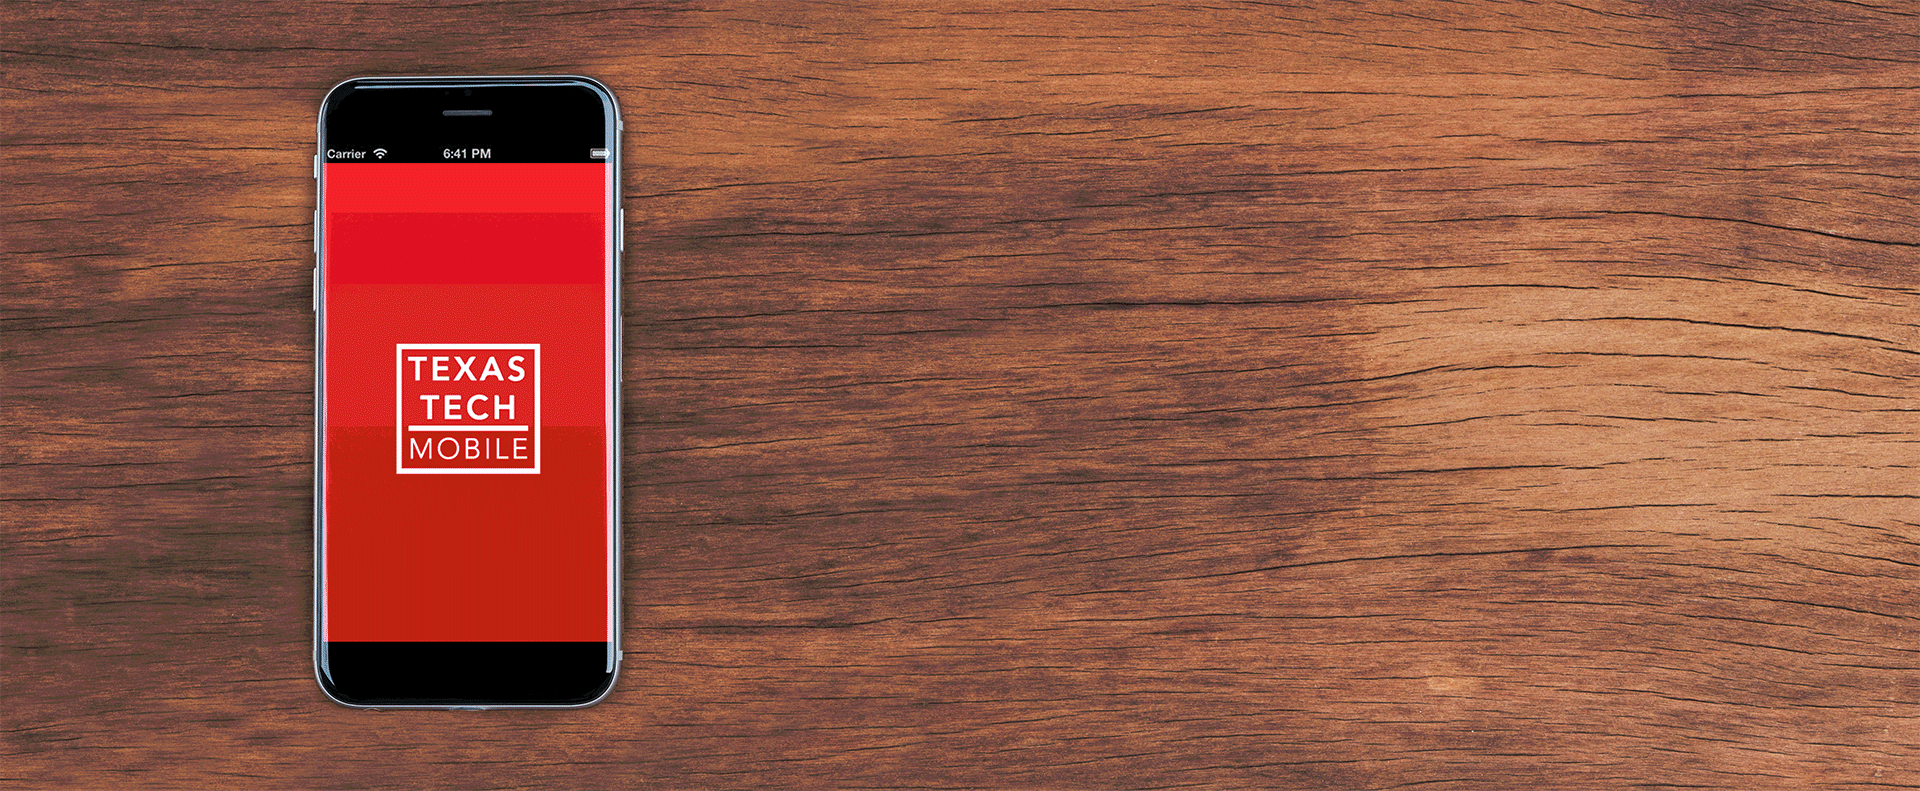 iPhone with revolving images of Texas Tech Mobile App on a wood background